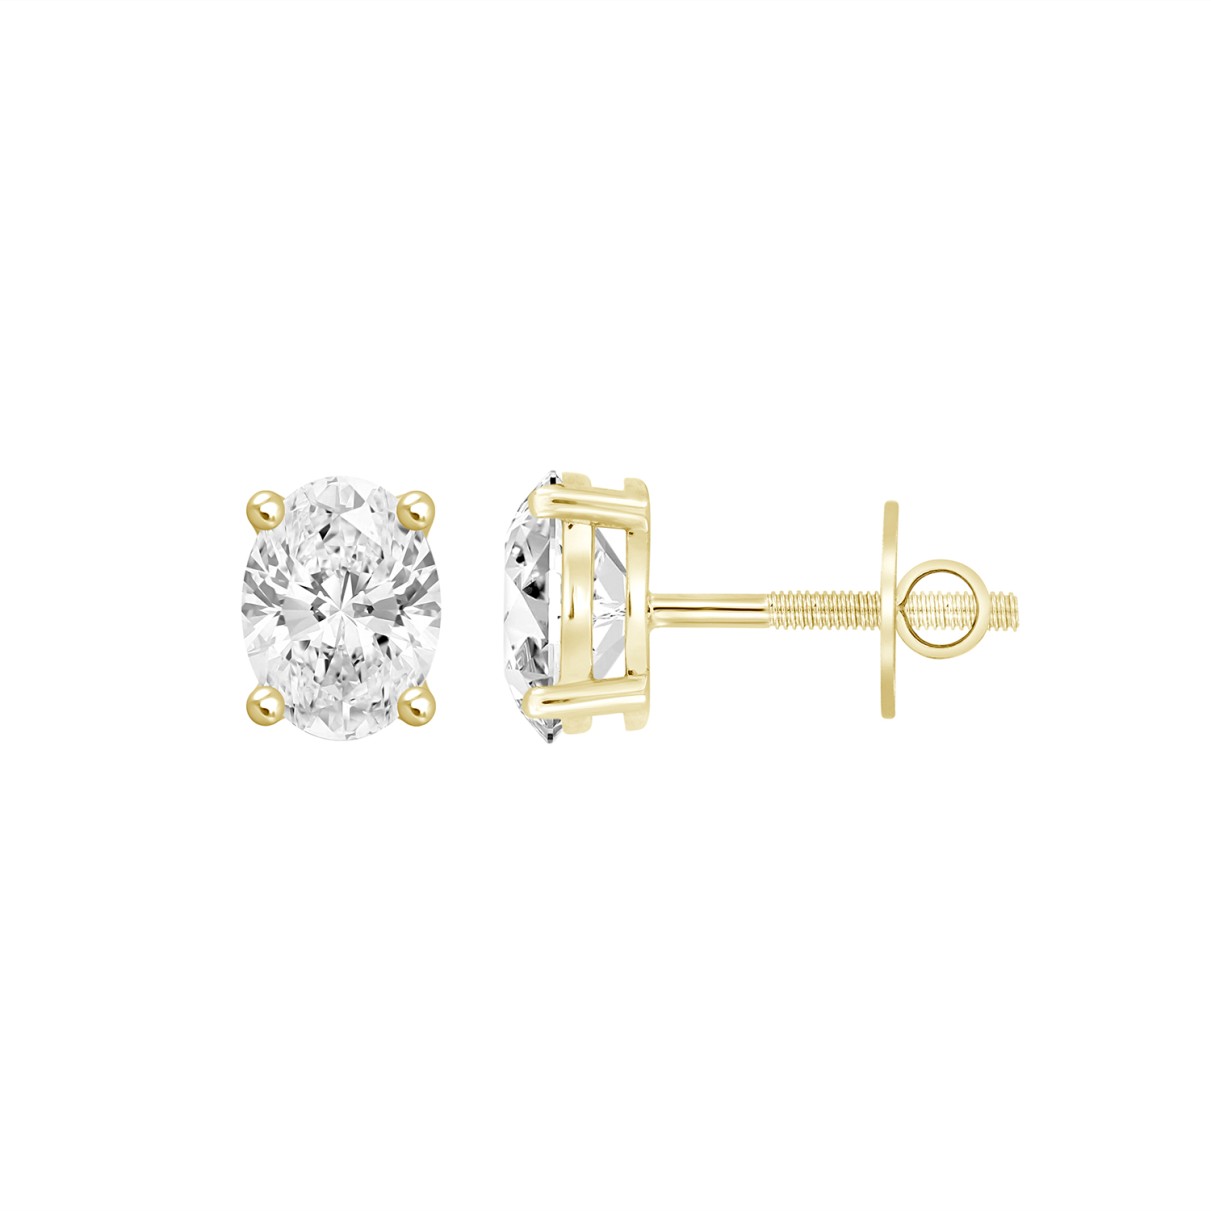 LADIES SOLITAIRE EARRINGS  1CT OVAL DIAMOND 14K YELLOW GOLD